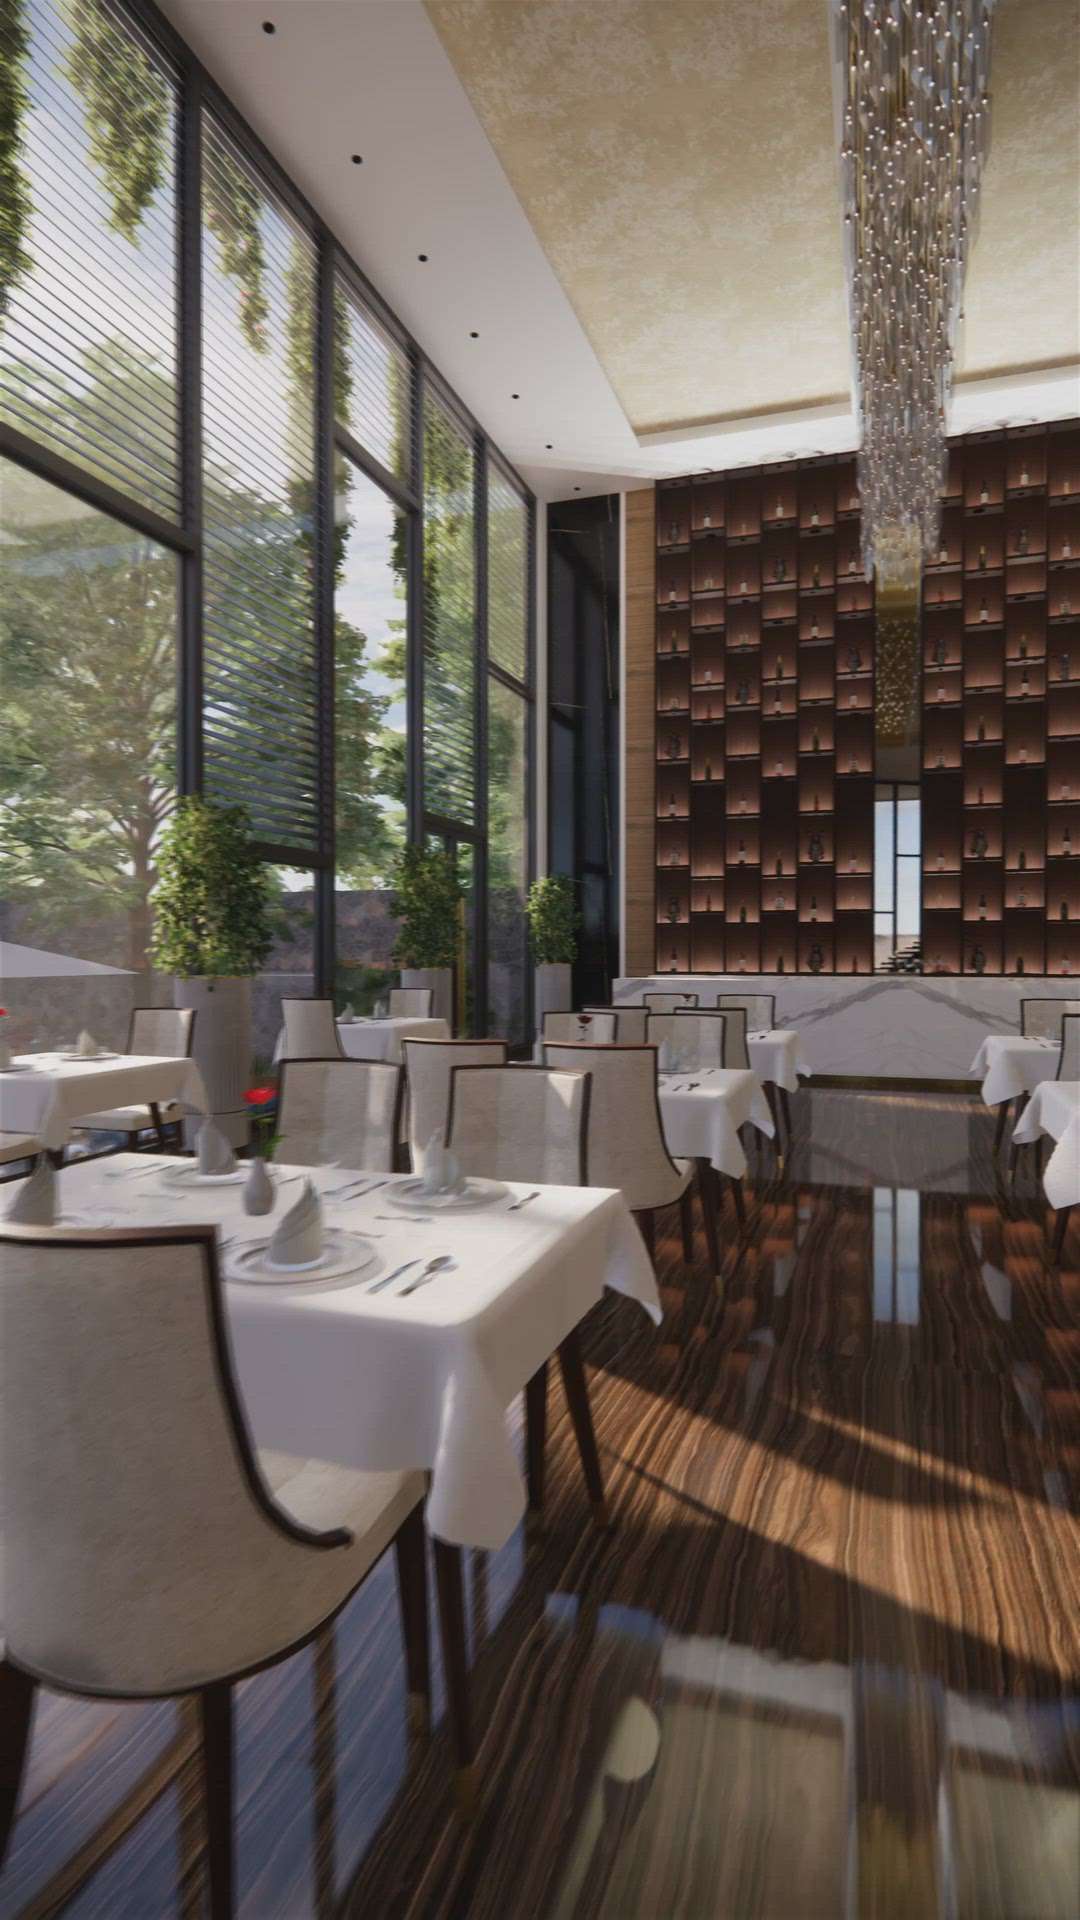 The perfect outdoor space can elevate any fine dining experience. At this restaurant, the carefully designed seating area creates a relaxing and inviting
atmosphere for guests to enjoy their meals al fresco.

dwellcon.in
Live The Experience

#dwellcon #livetheexperience #outdoorliving #alfresco
#diningexperience #restaurantdesign #architecture
#designinspiration #relaxingvibes #diningallday
#outdoorfurniture #interiordesign #patiogoals
#beautifulspaces #luxurydesign #finedining
#architecturephotography #seatingarea #homedesign
#outdoordesign #elegantdesign #architecturaldigest
#outdoorstyle #urbanoasis #openairdining
#designyourdreams #archilovers #restaurantseating